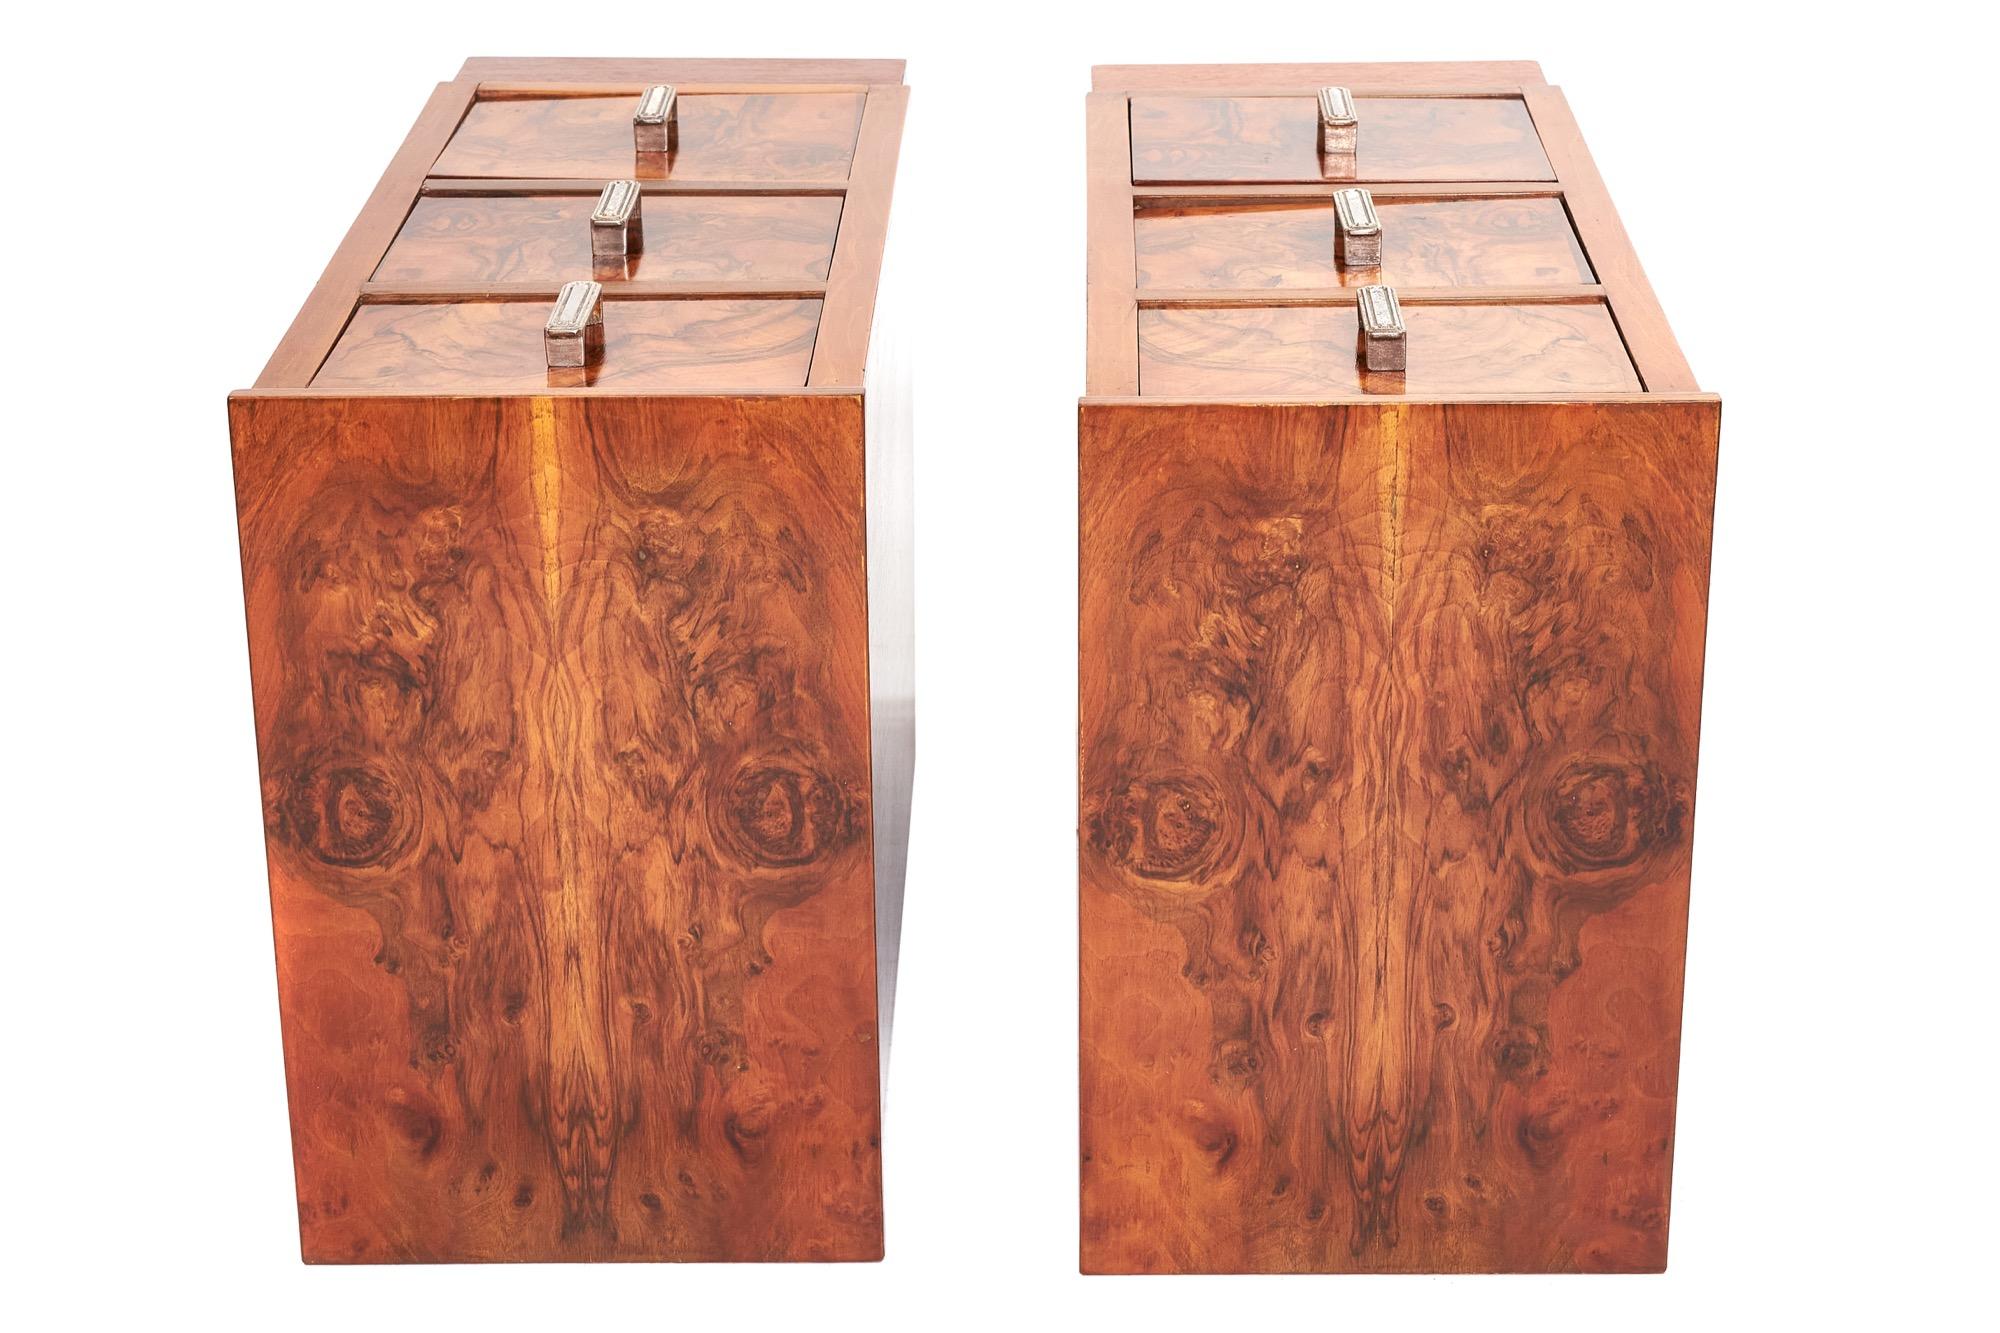 Pair of antique figured burr walnut bedside chests

Pair of antique figured walnut bedside chests having quality burr walnut tops, three burr walnut mahogany lined drawers and having unusual chrome plated handles to the front.

The colour and